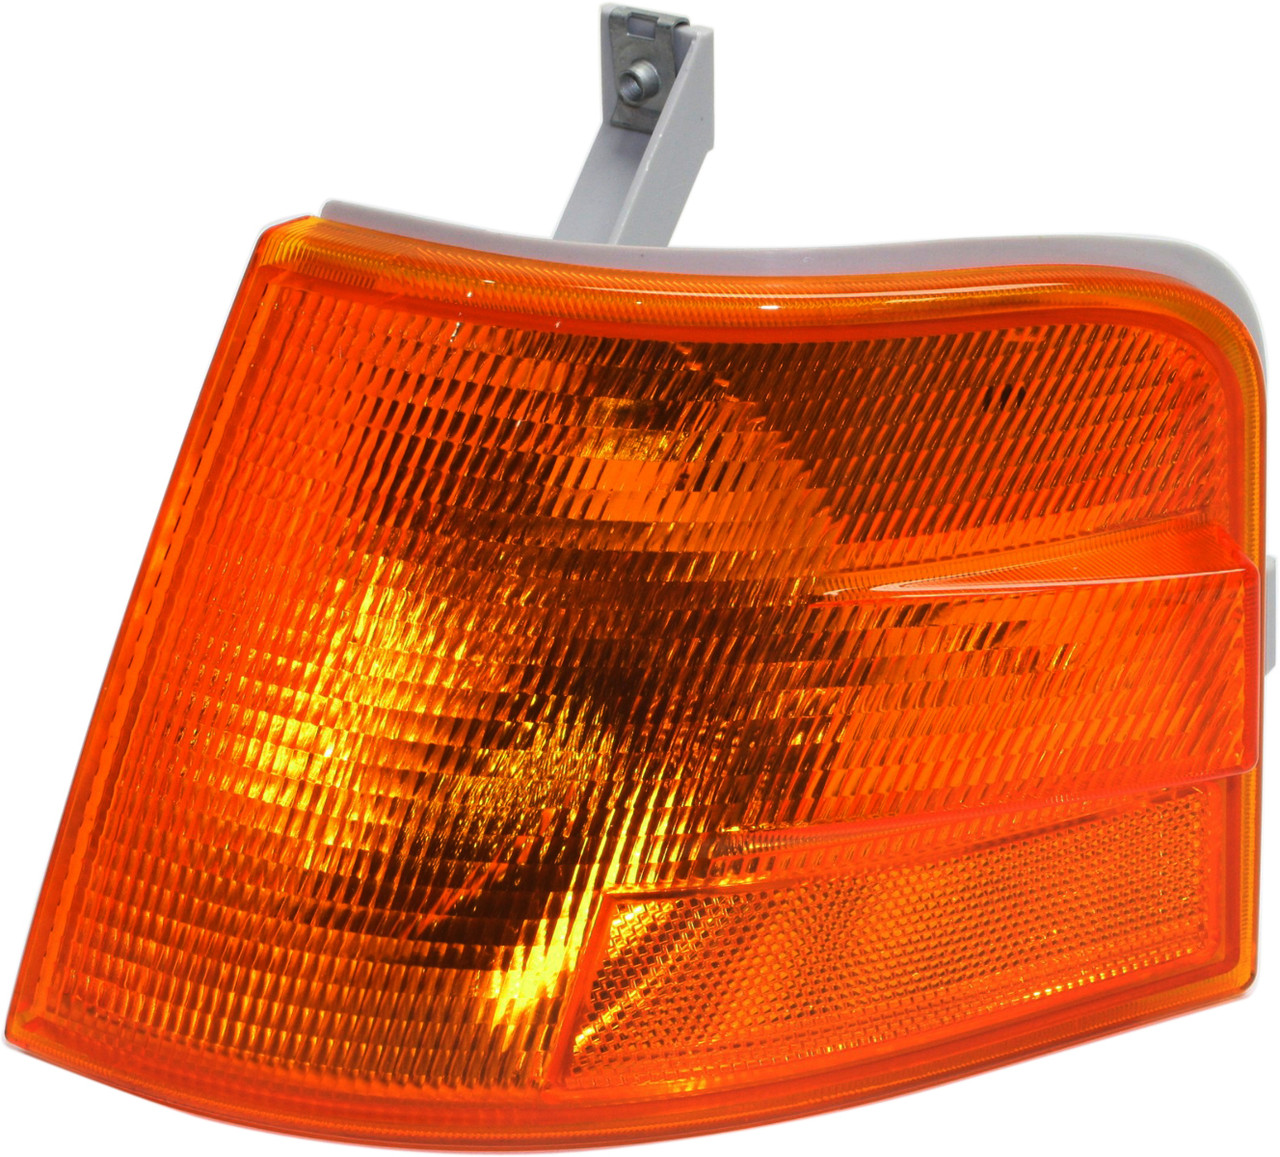 VOLVO HD VN SERIES 96-03 SIGNAL LAMP LH, Lens and Housing, Amber Lens